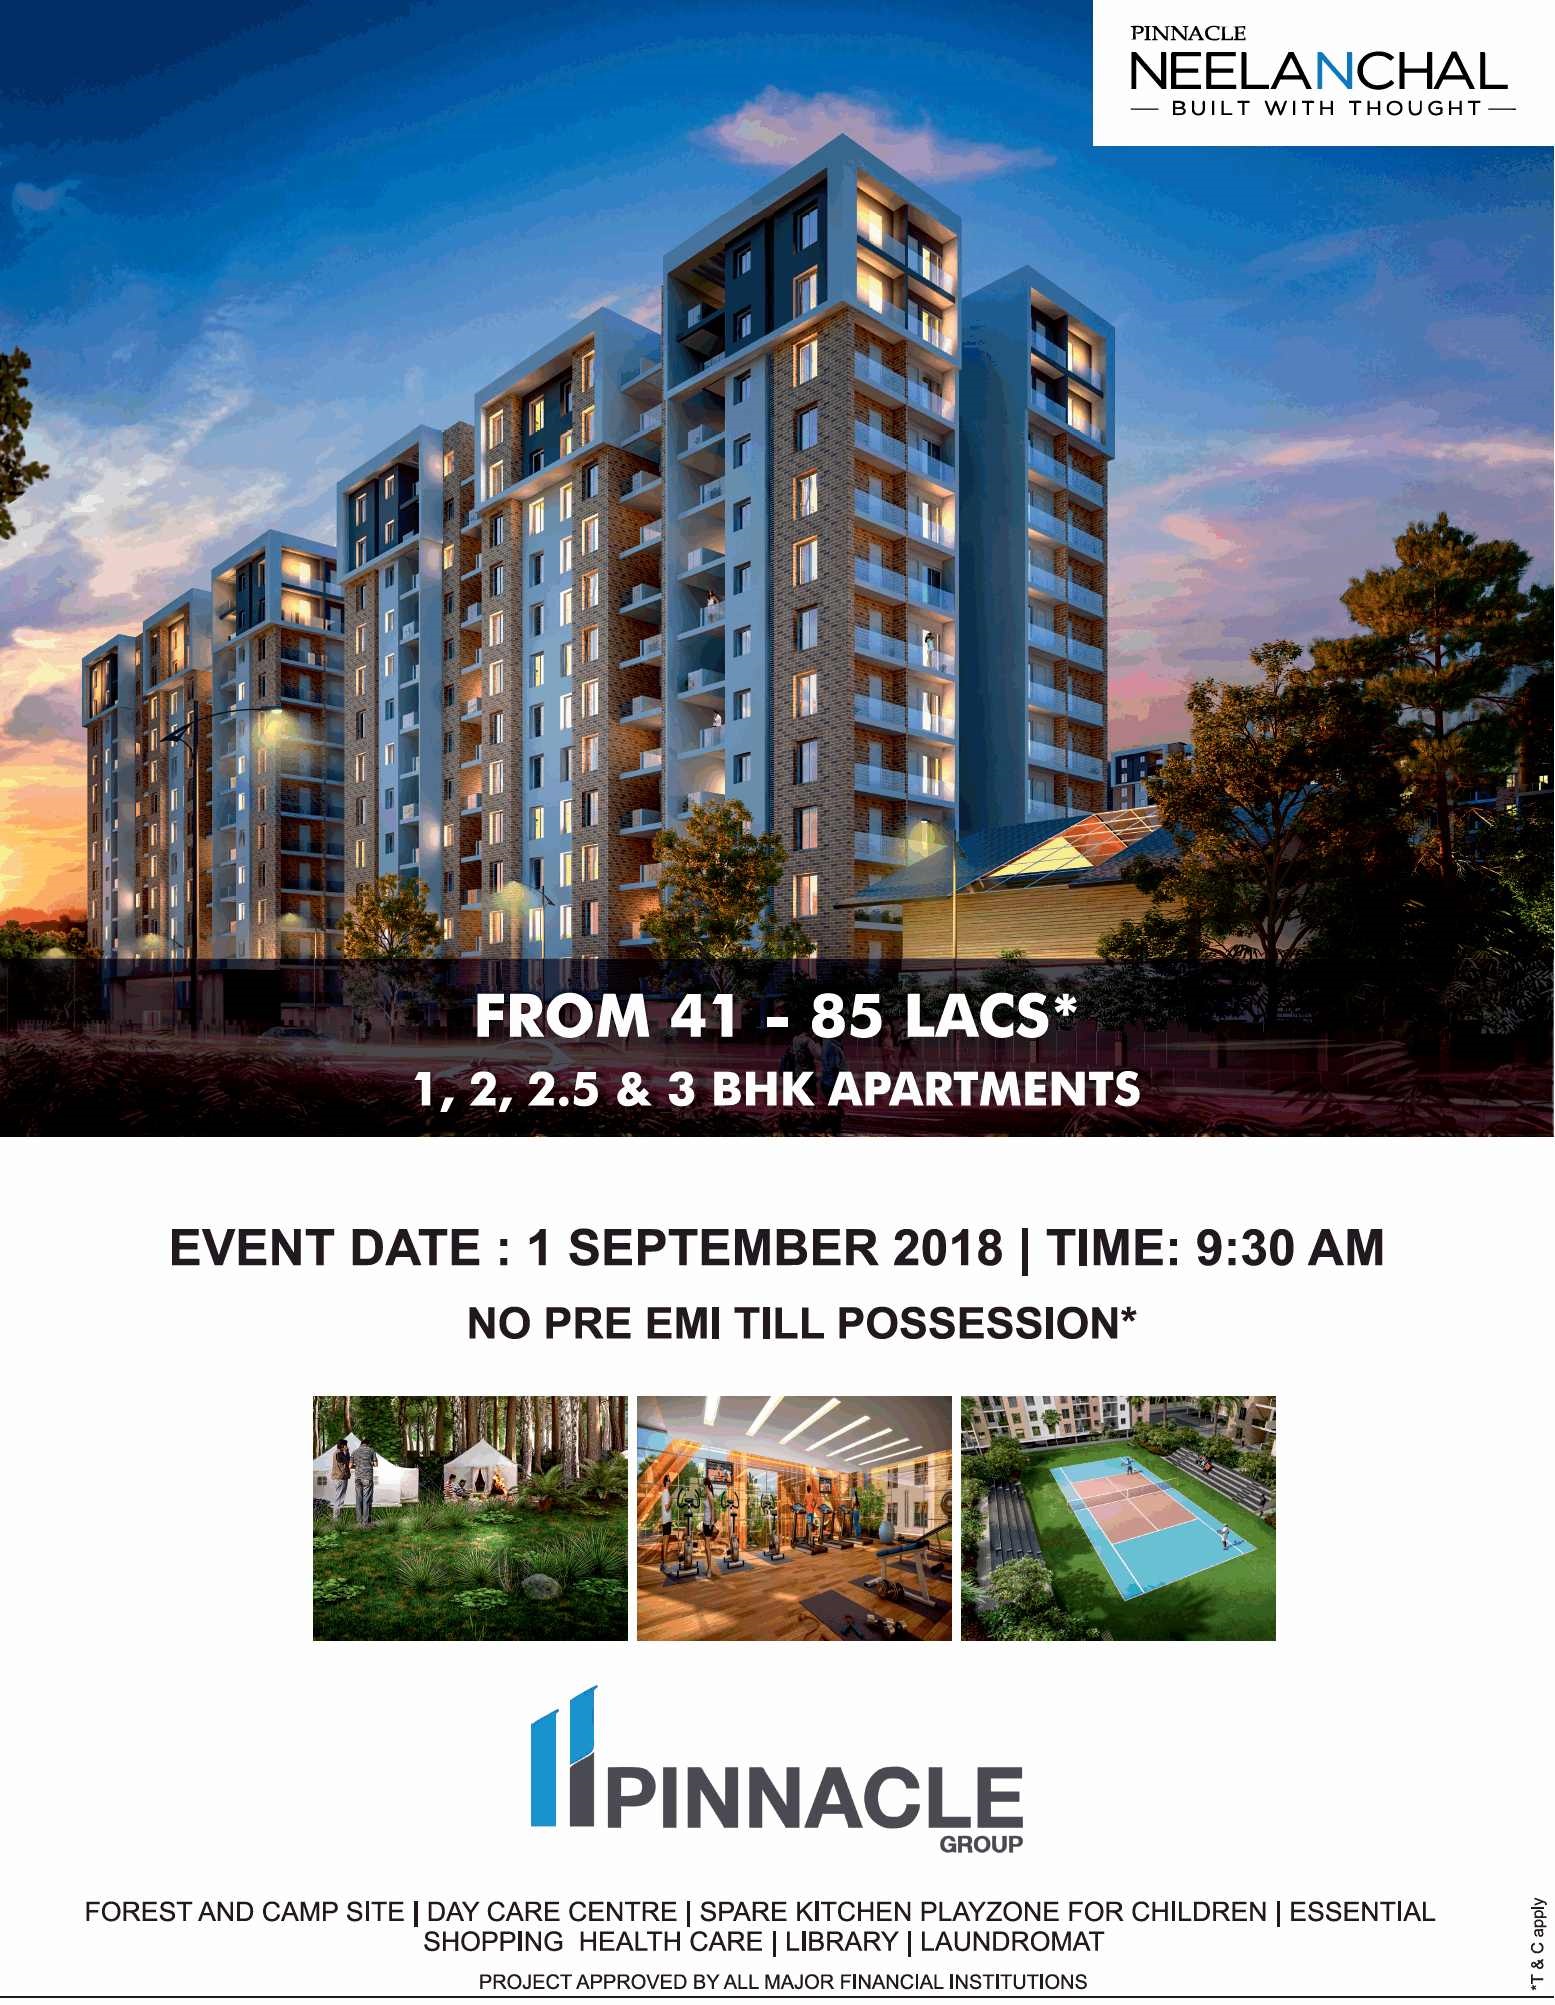 Pay no pre EMI till possession at Pinnacle Neelanchal in Pune